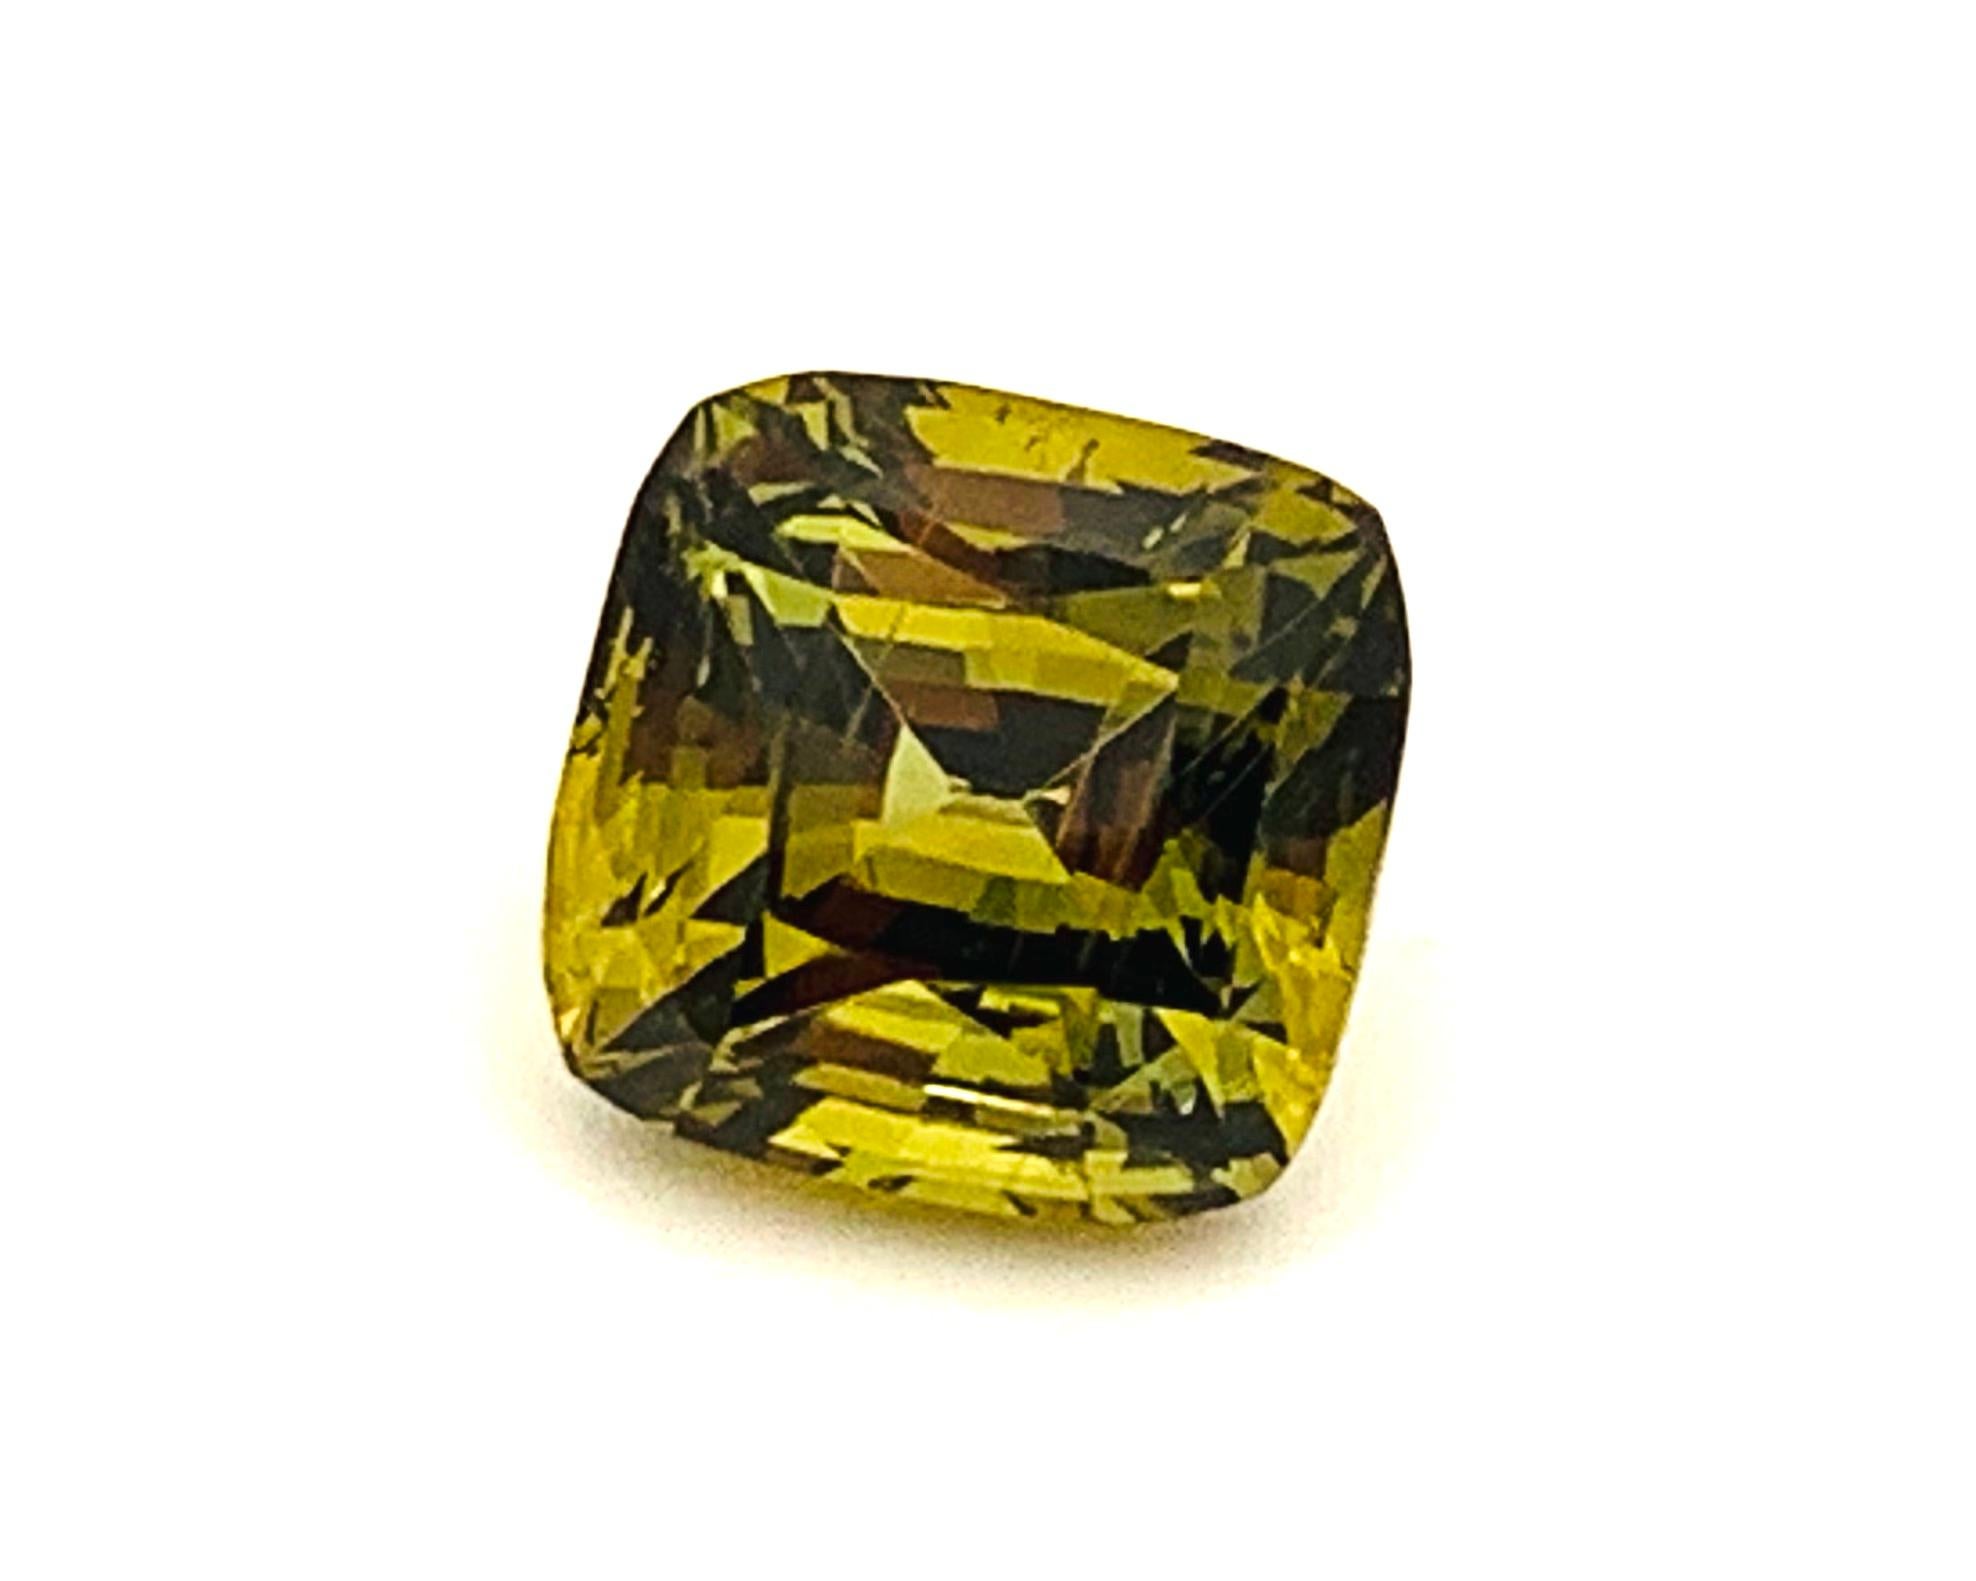 15.52 Carat Faceted Chrysoberyl Cushion, Unset Loose Gemstone For Sale 1